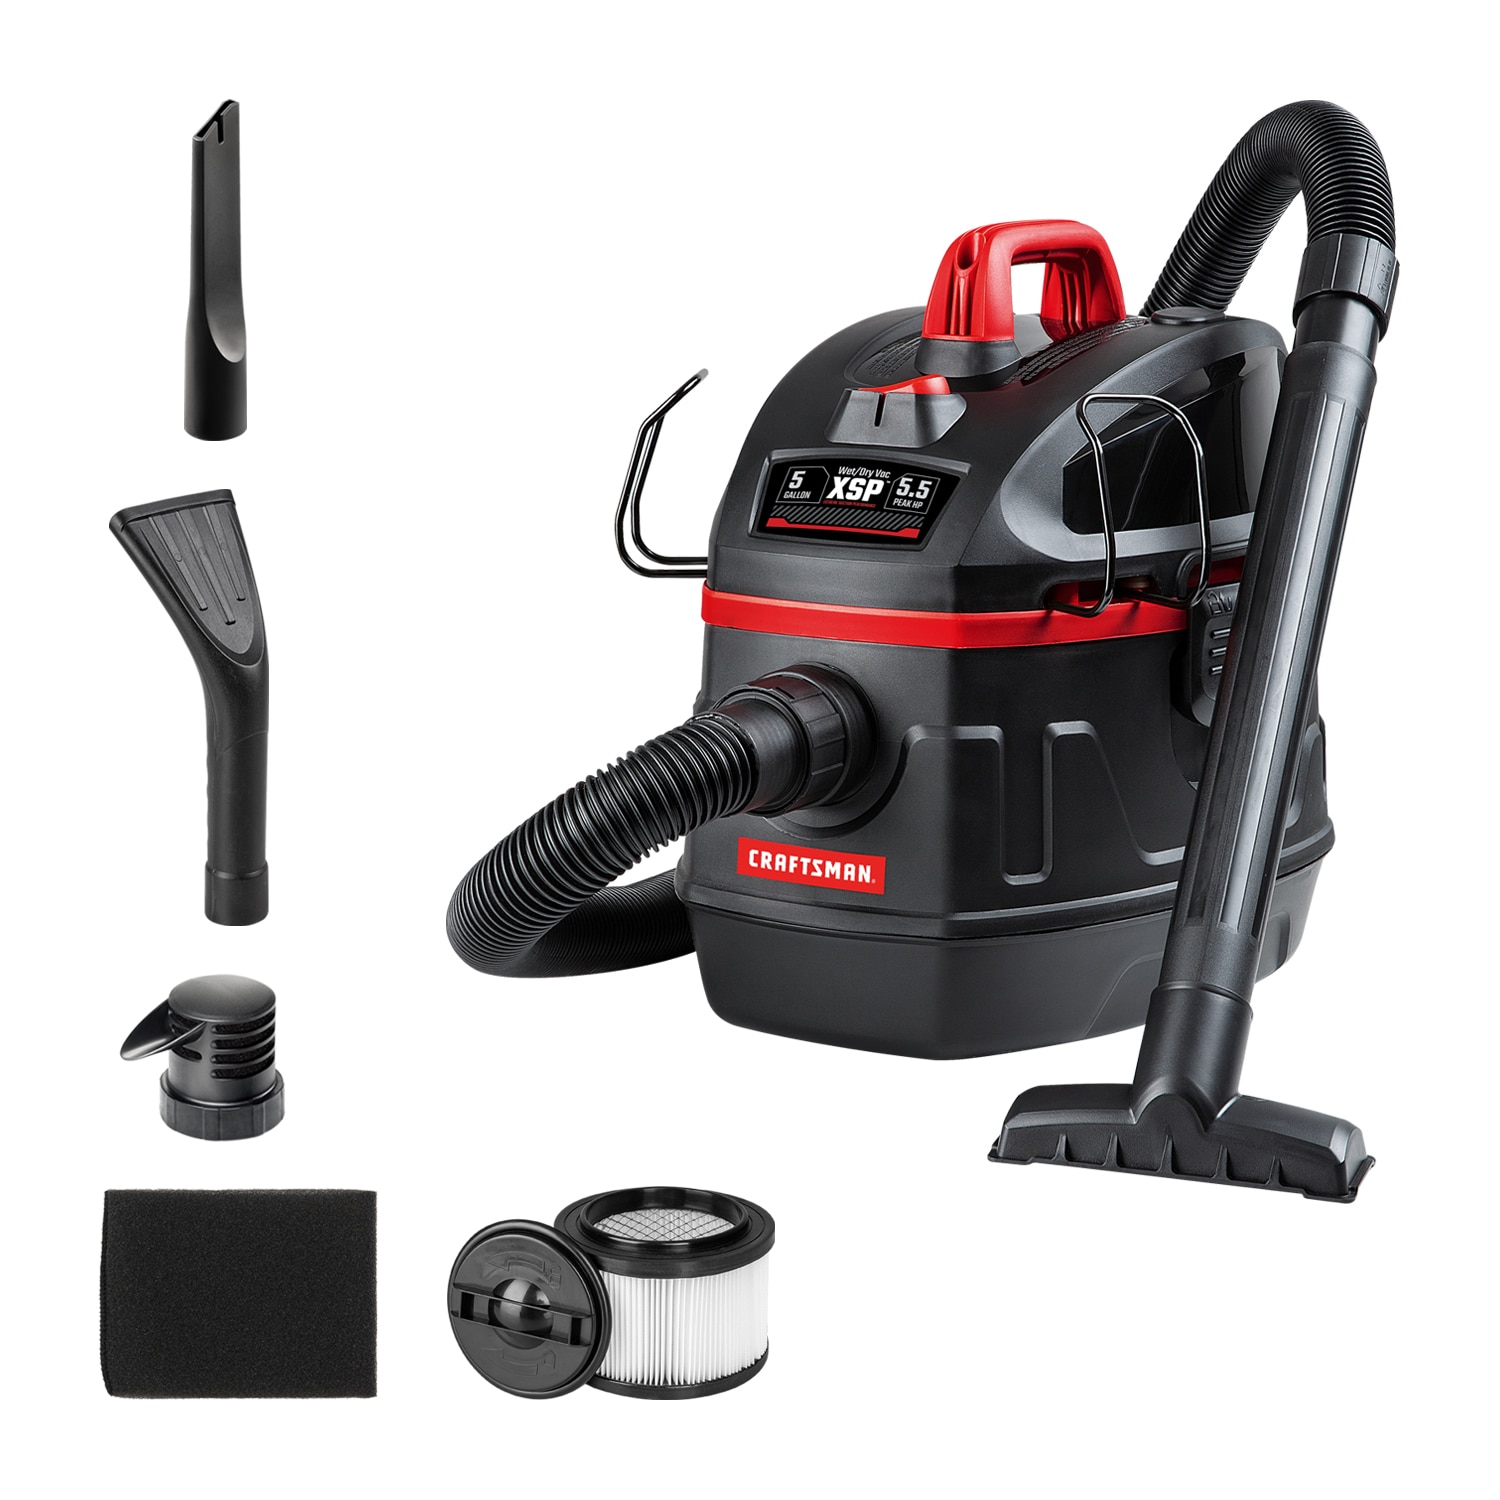 Ridgid shop vac • Compare (37 products) see prices »